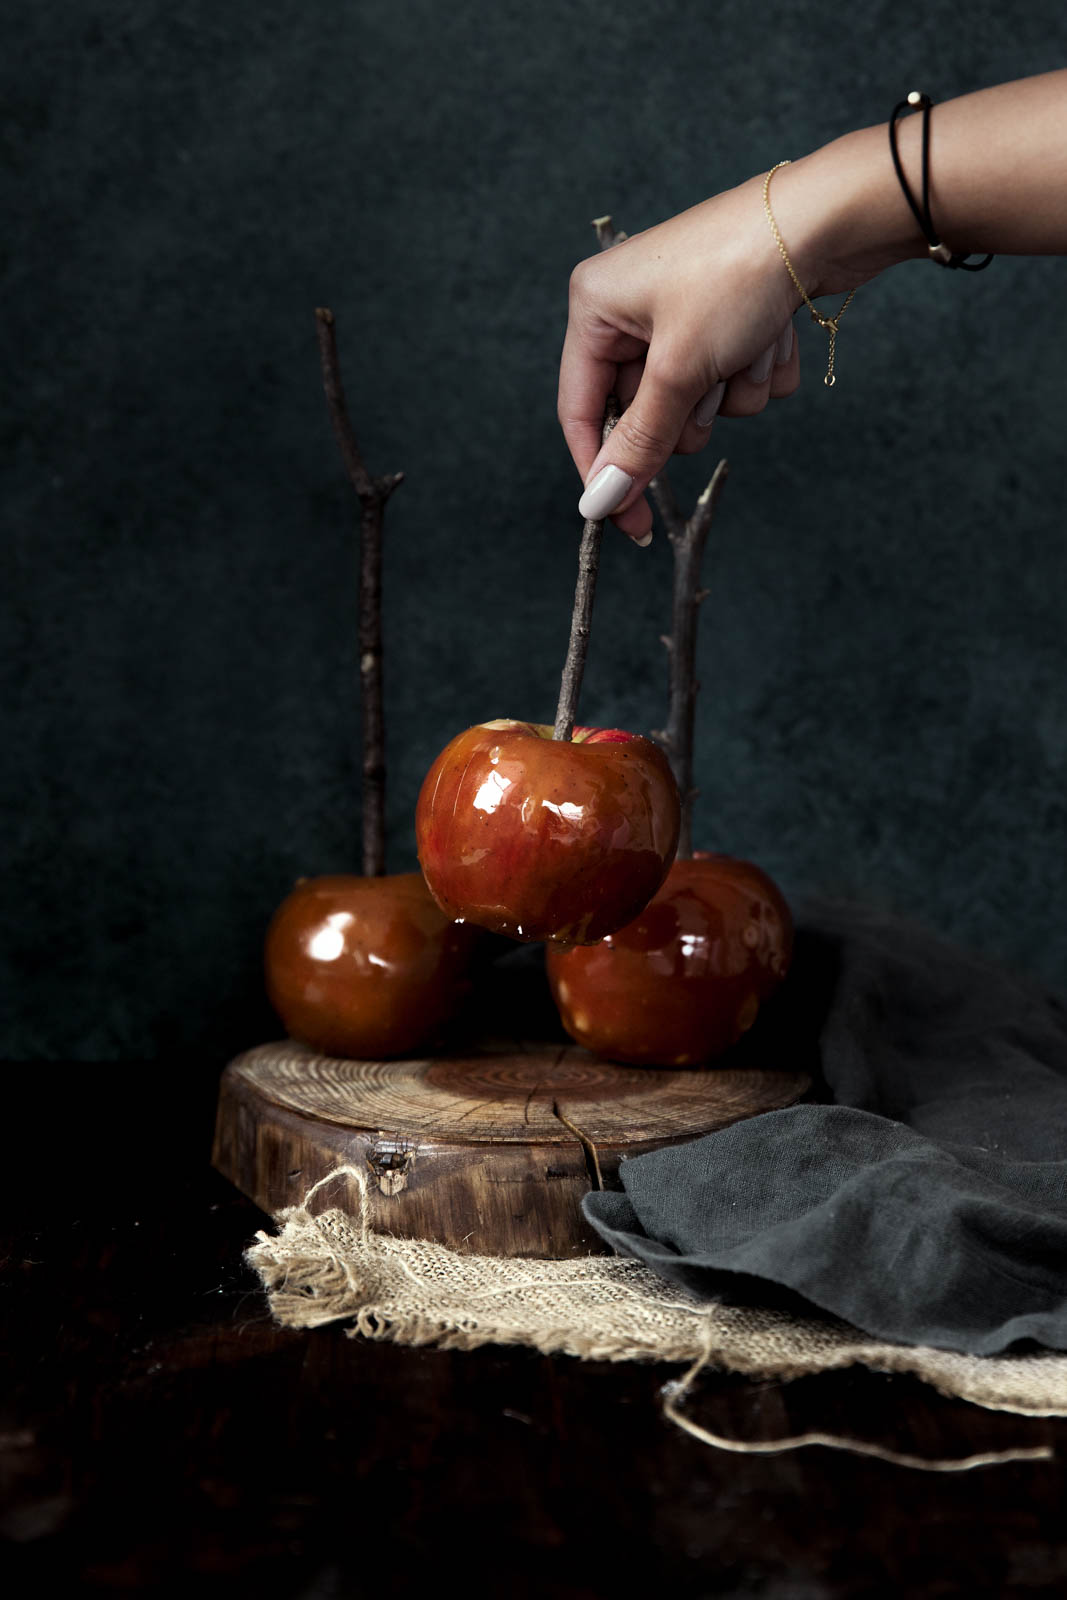 Homemade caramel apples spiked with bourbon and flavored with brown butter... uhm, YES PLEASE?!